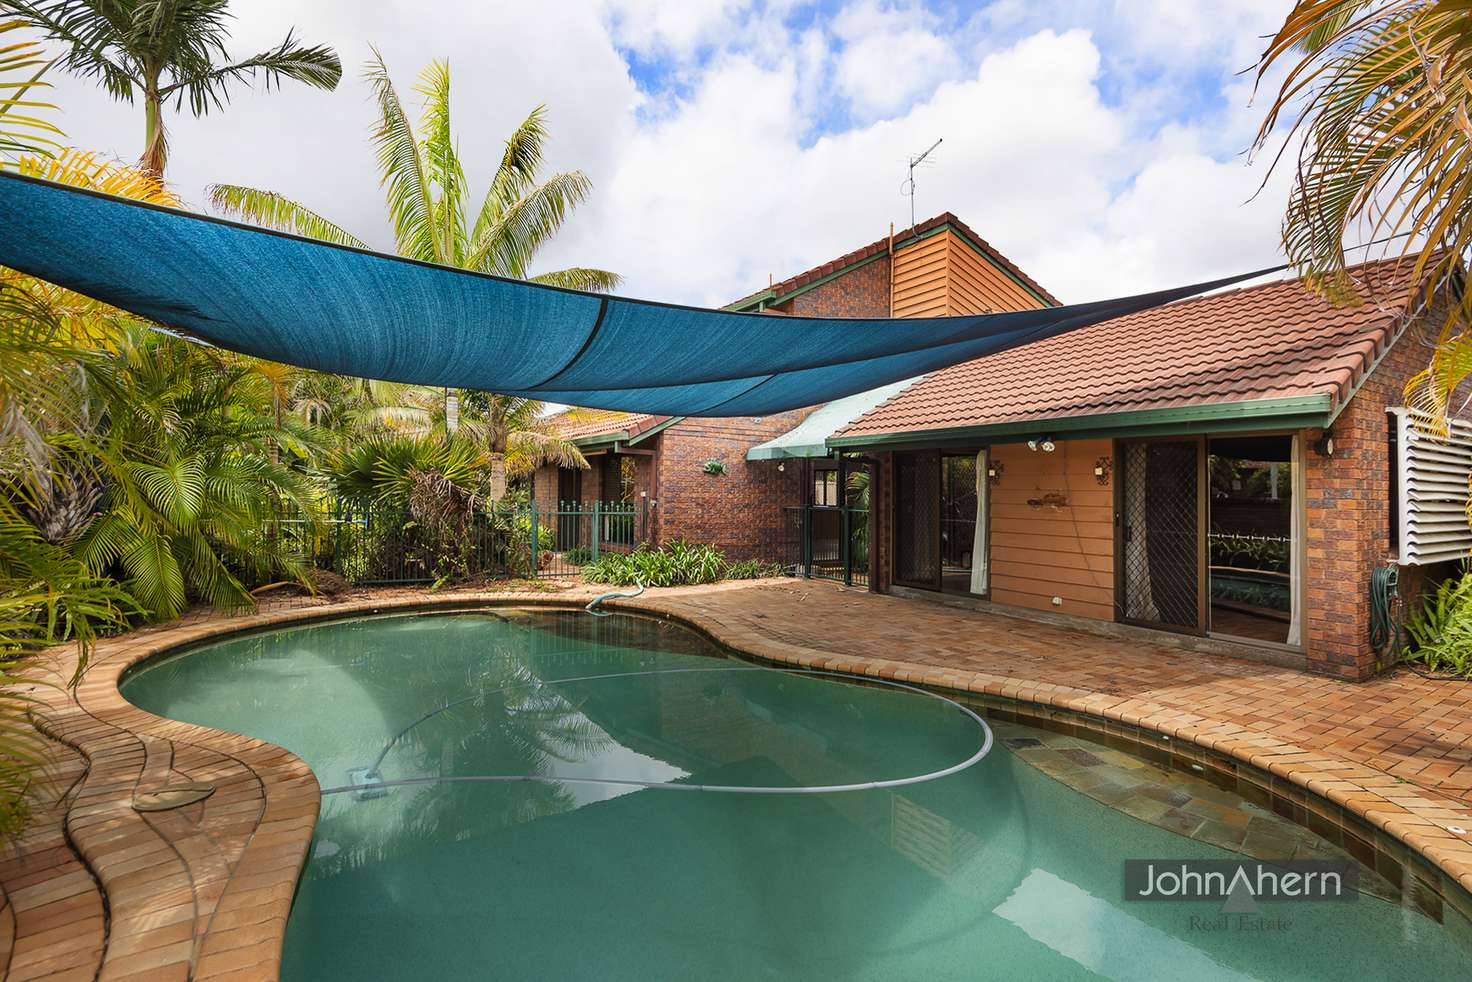 Main view of Homely house listing, 2 Brentwood Dr, Daisy Hill QLD 4127